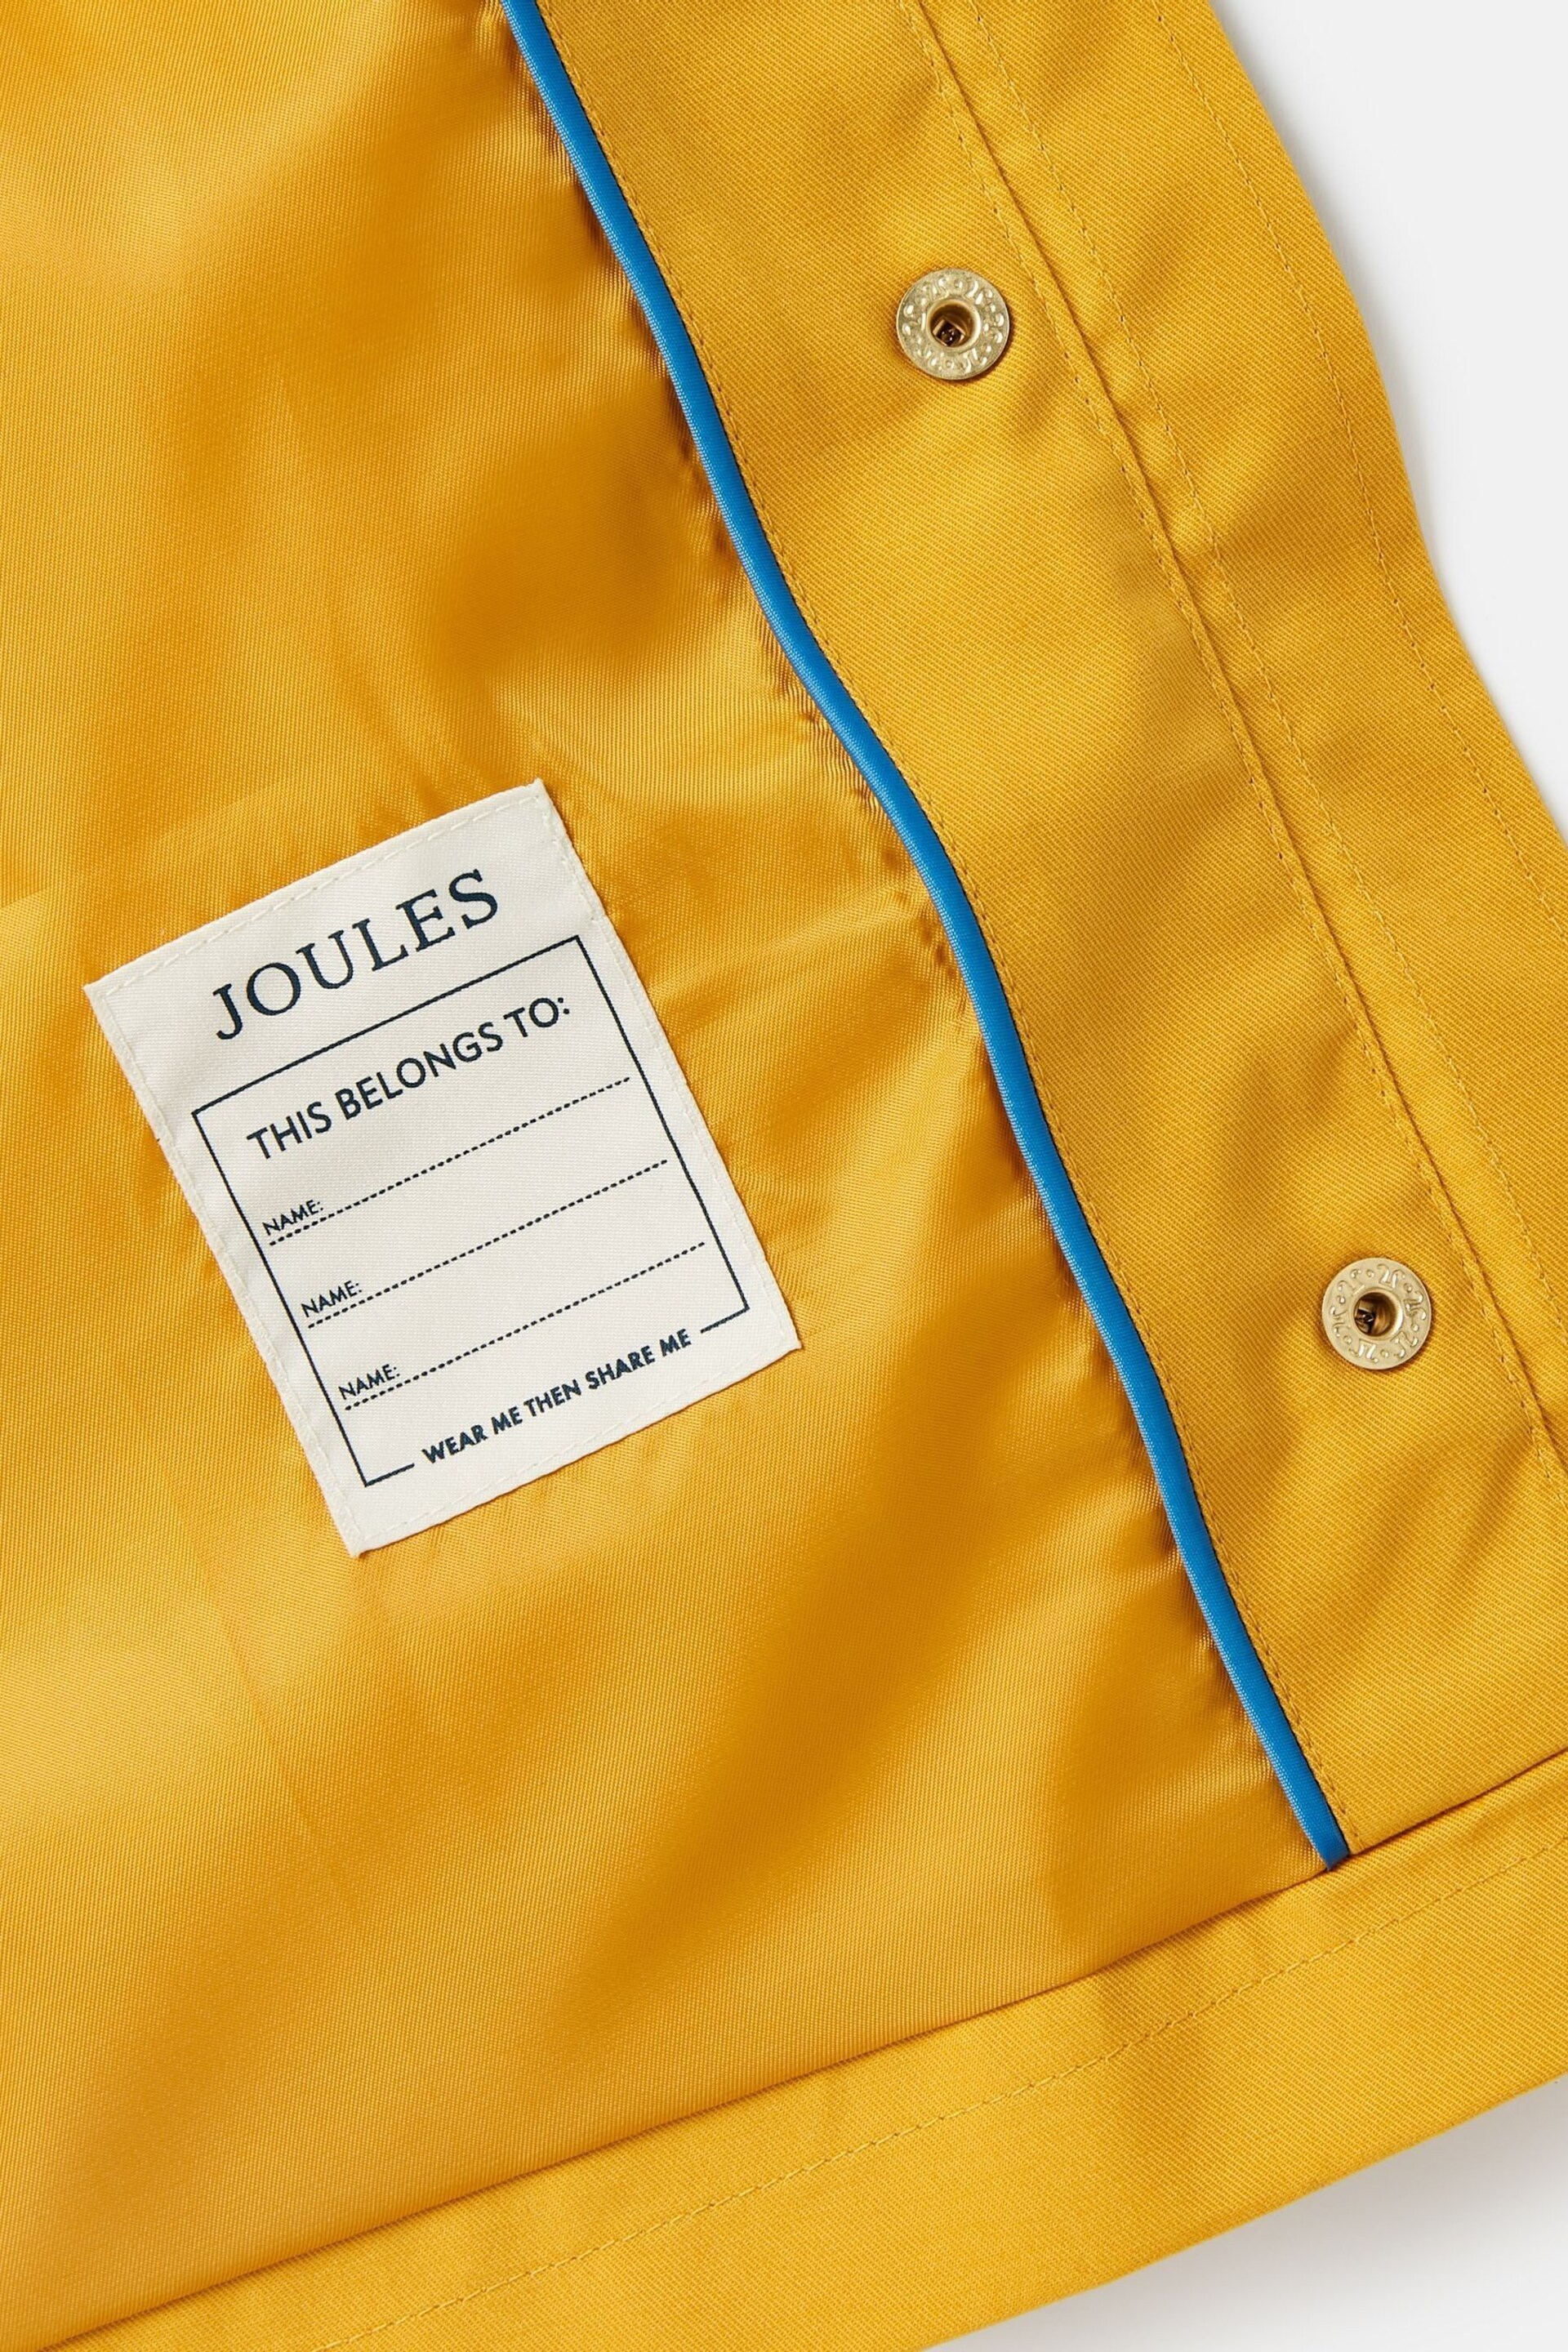 Joules Seacombe Yellow Waterproof Hooded Raincoat with Cape - Image 12 of 13